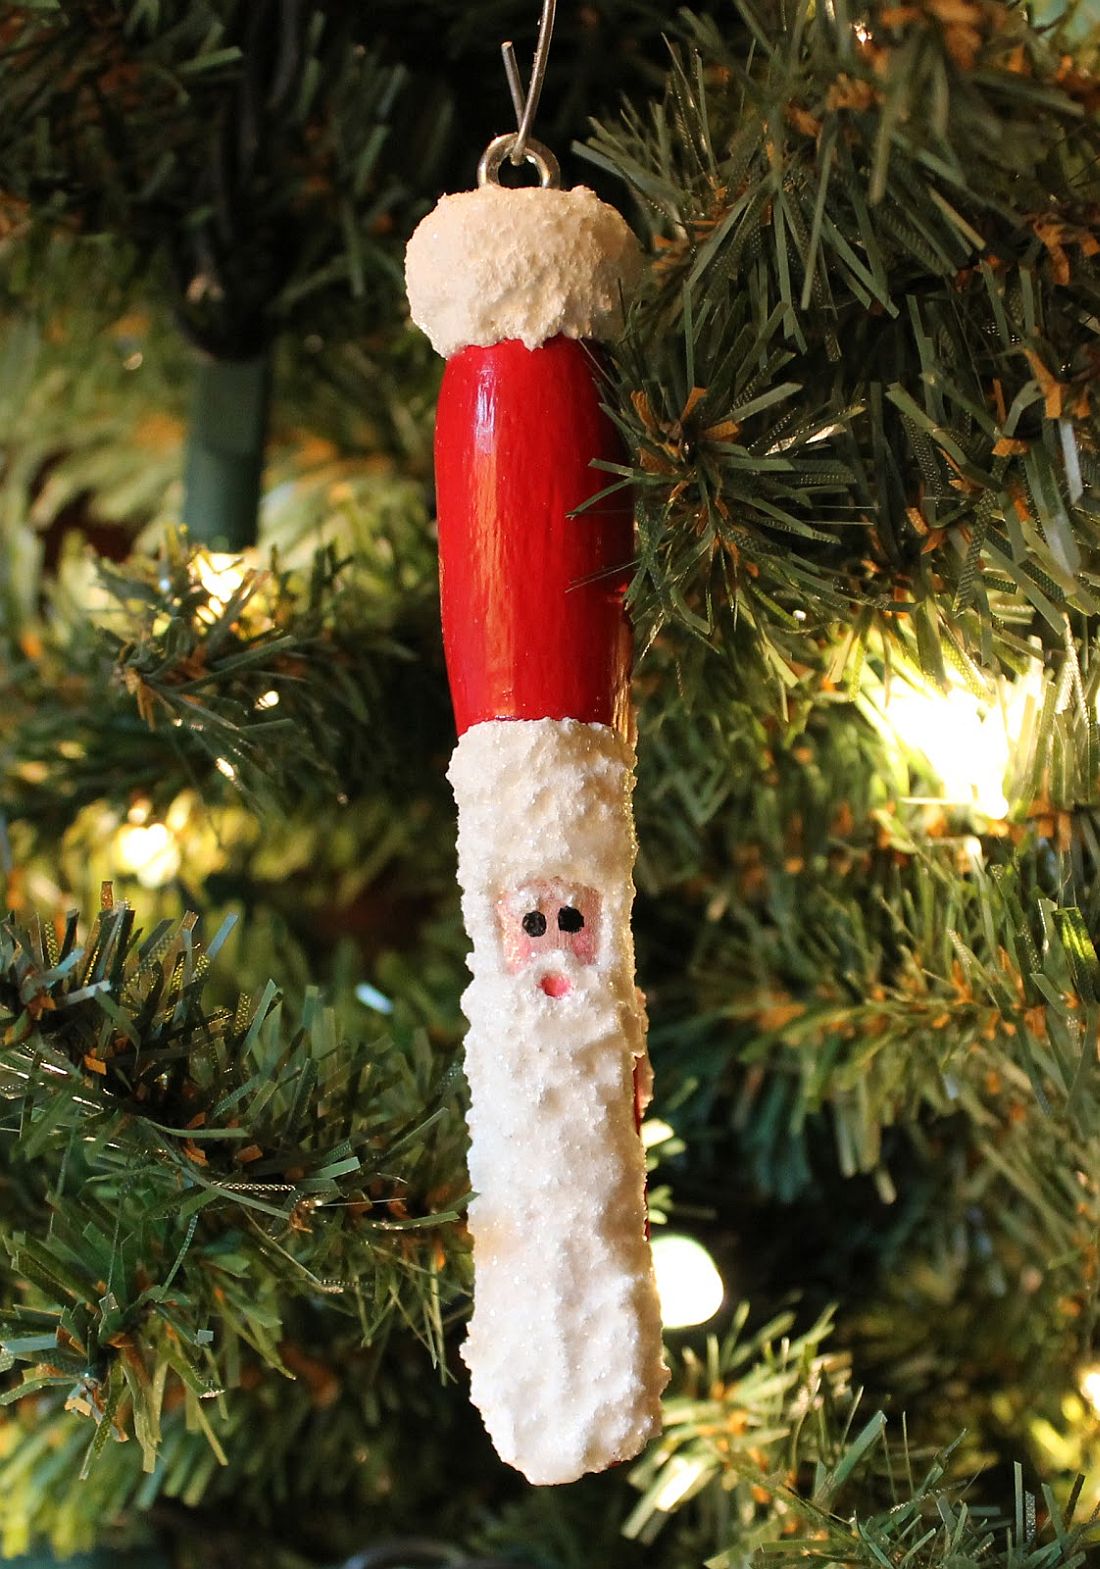 Taking-a-closer-look-at-the-Clothespin-Christmas-Ornament